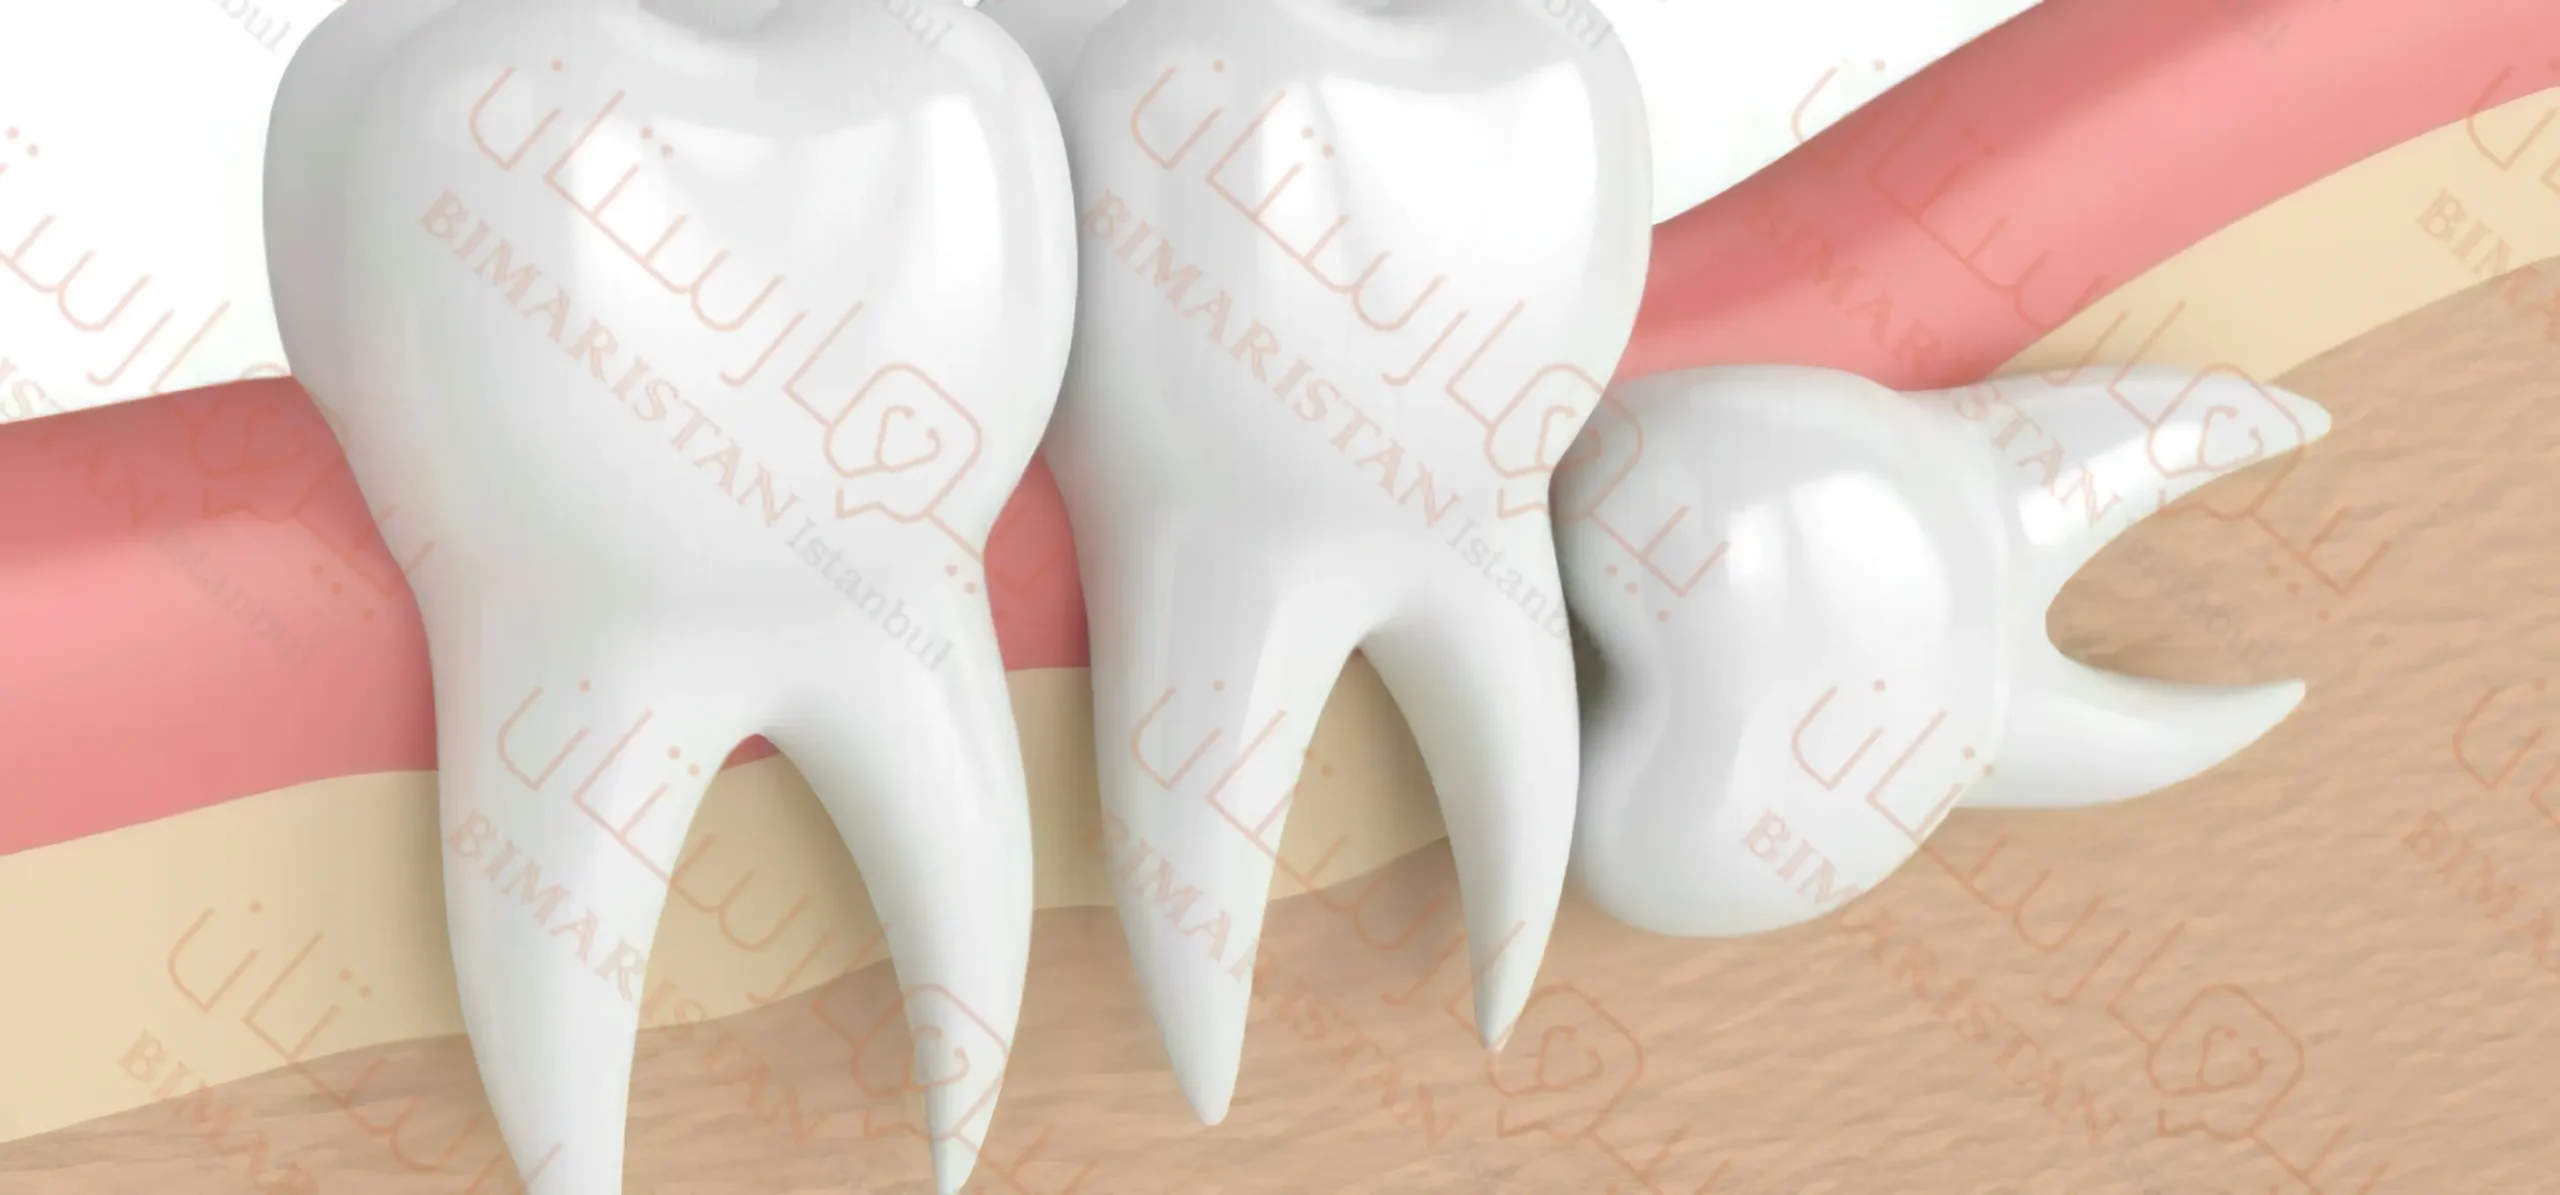 Wisdom tooth extraction in Turkey